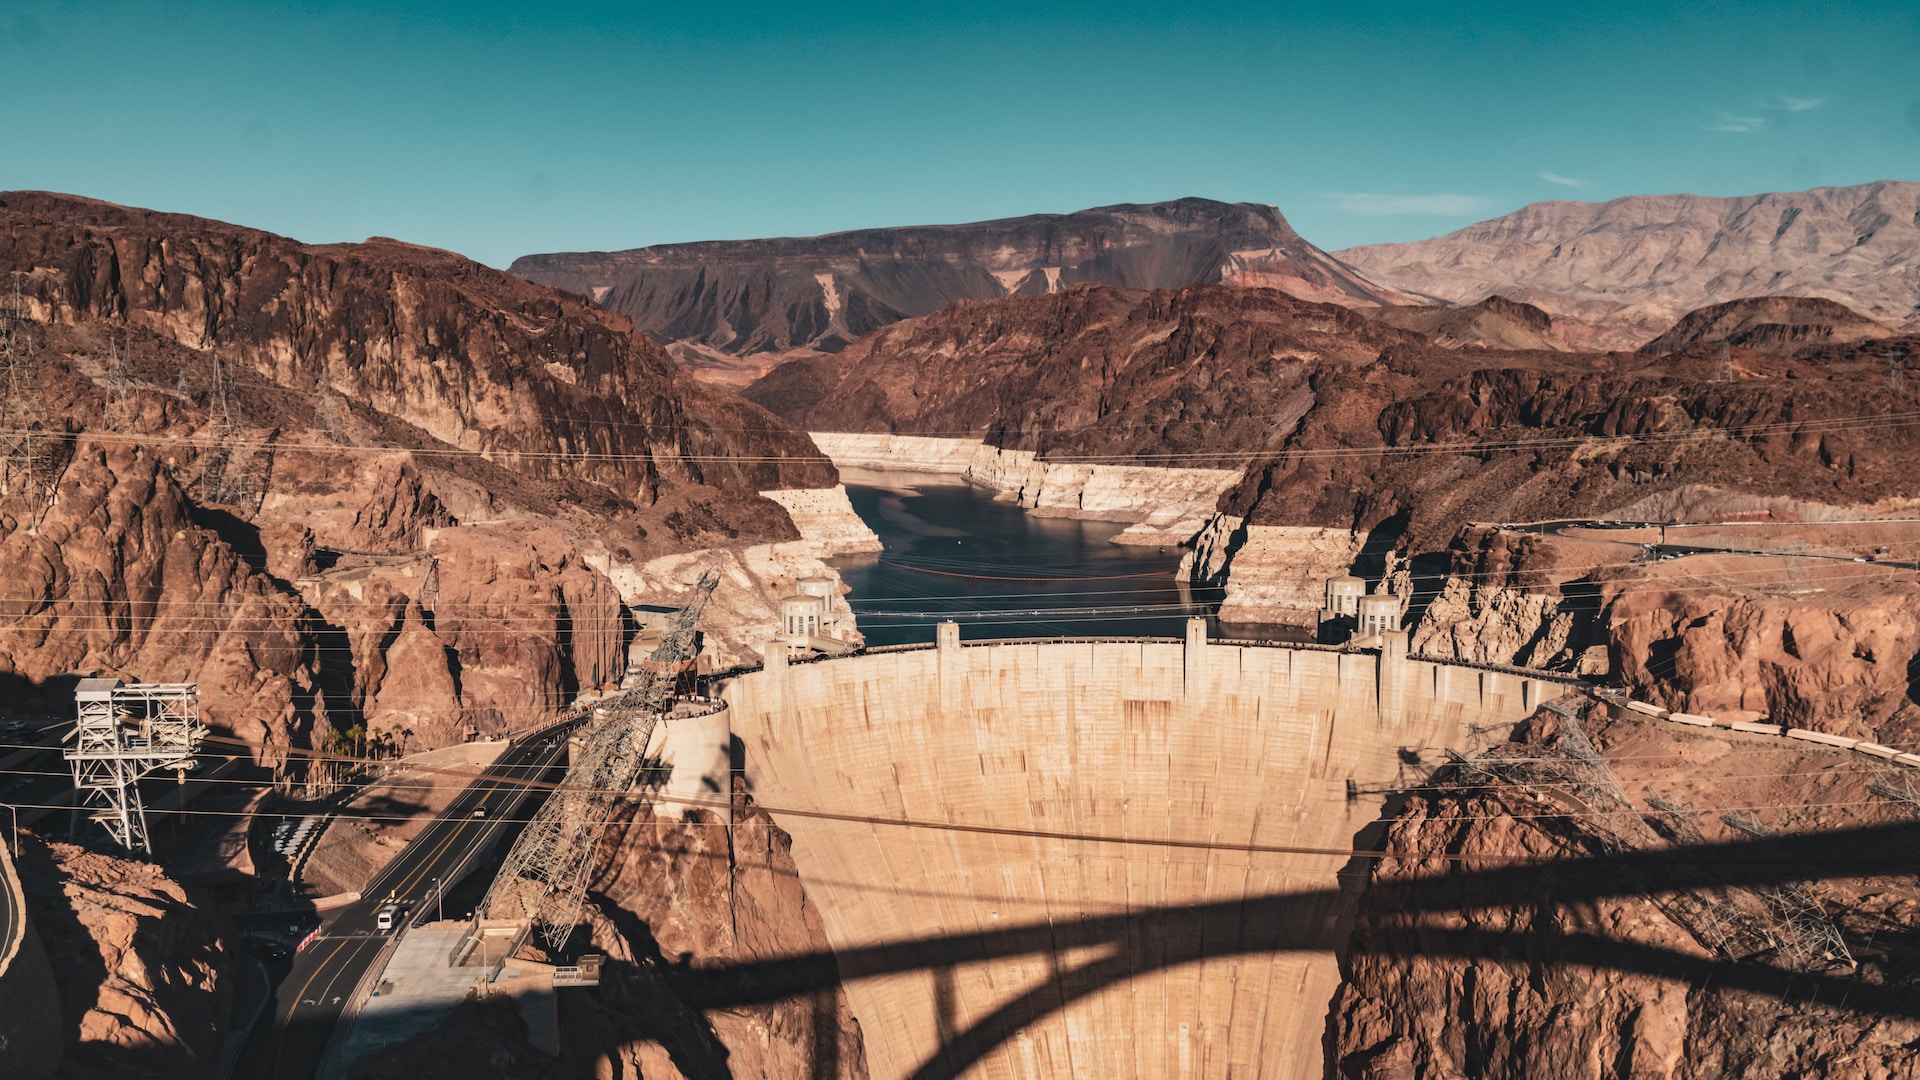 The Hoover Dam view from a bridge.